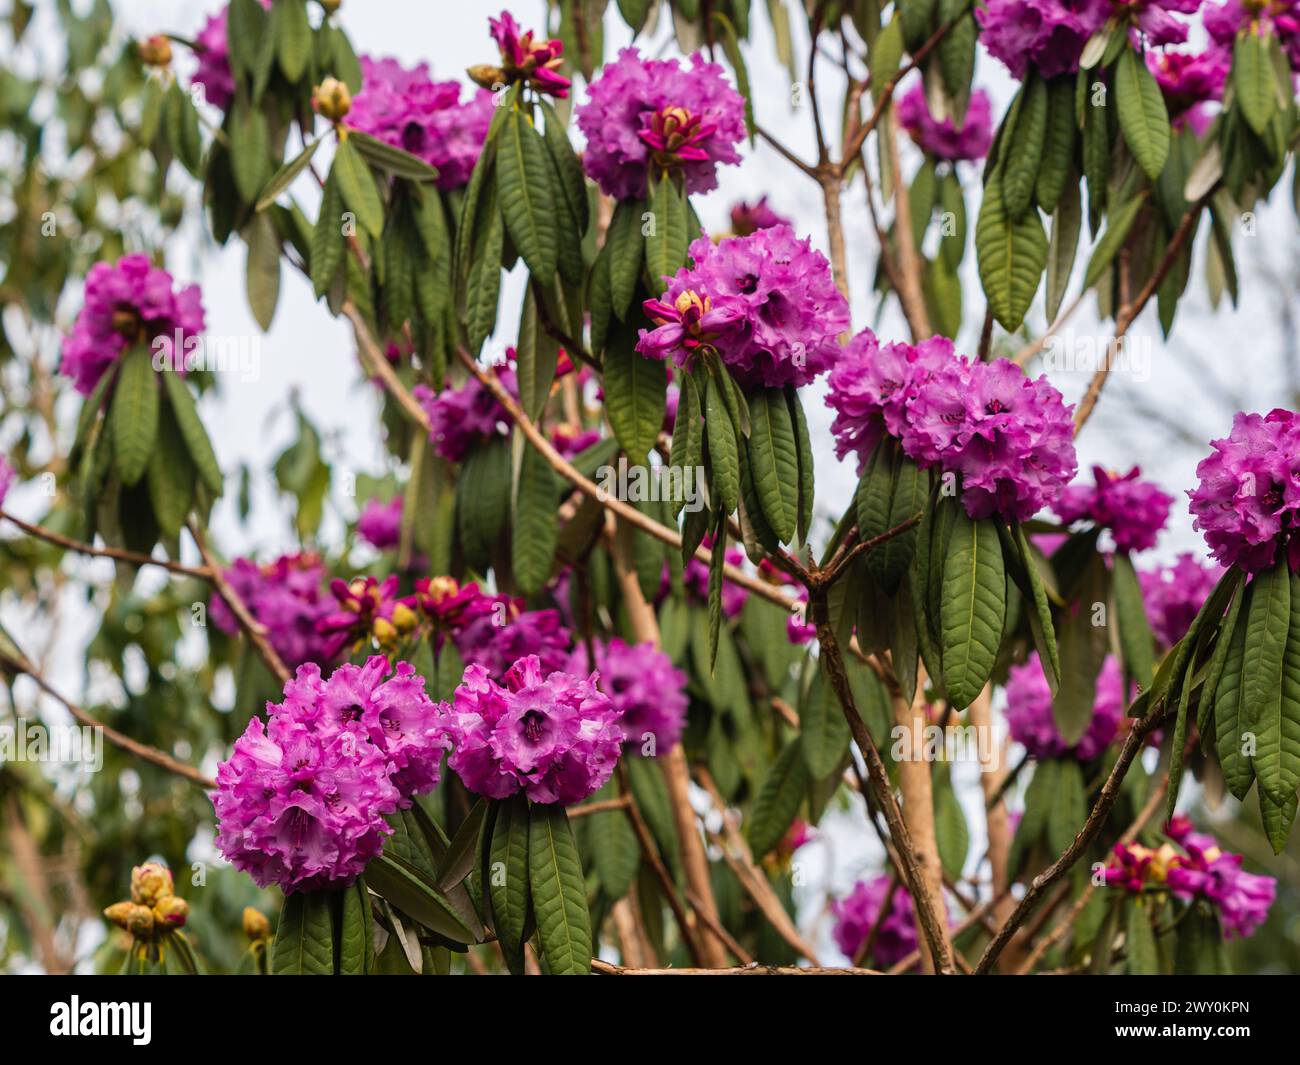 Purple early spring flowers of the hardy ornamental shrub Rhododendron niveum stand in trusses above the long narrow leaves Stock Photo